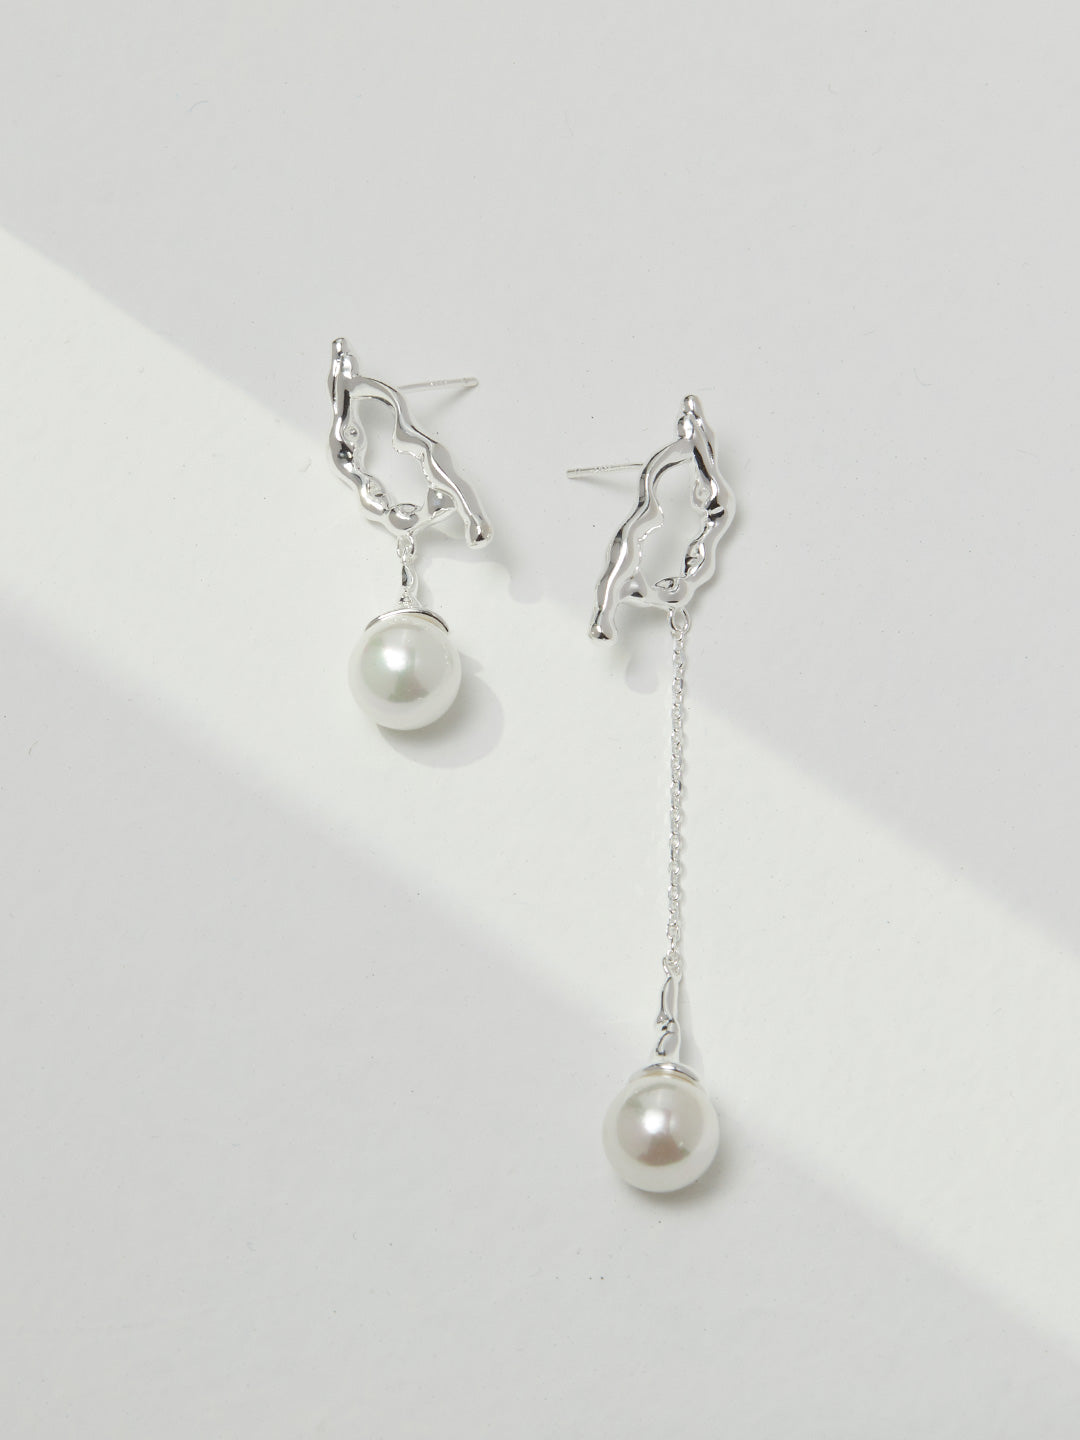 Timeless Elegance Redefined: 10MM Flawless Pearl Silver Necklace & Earrings - Revitalized Collection